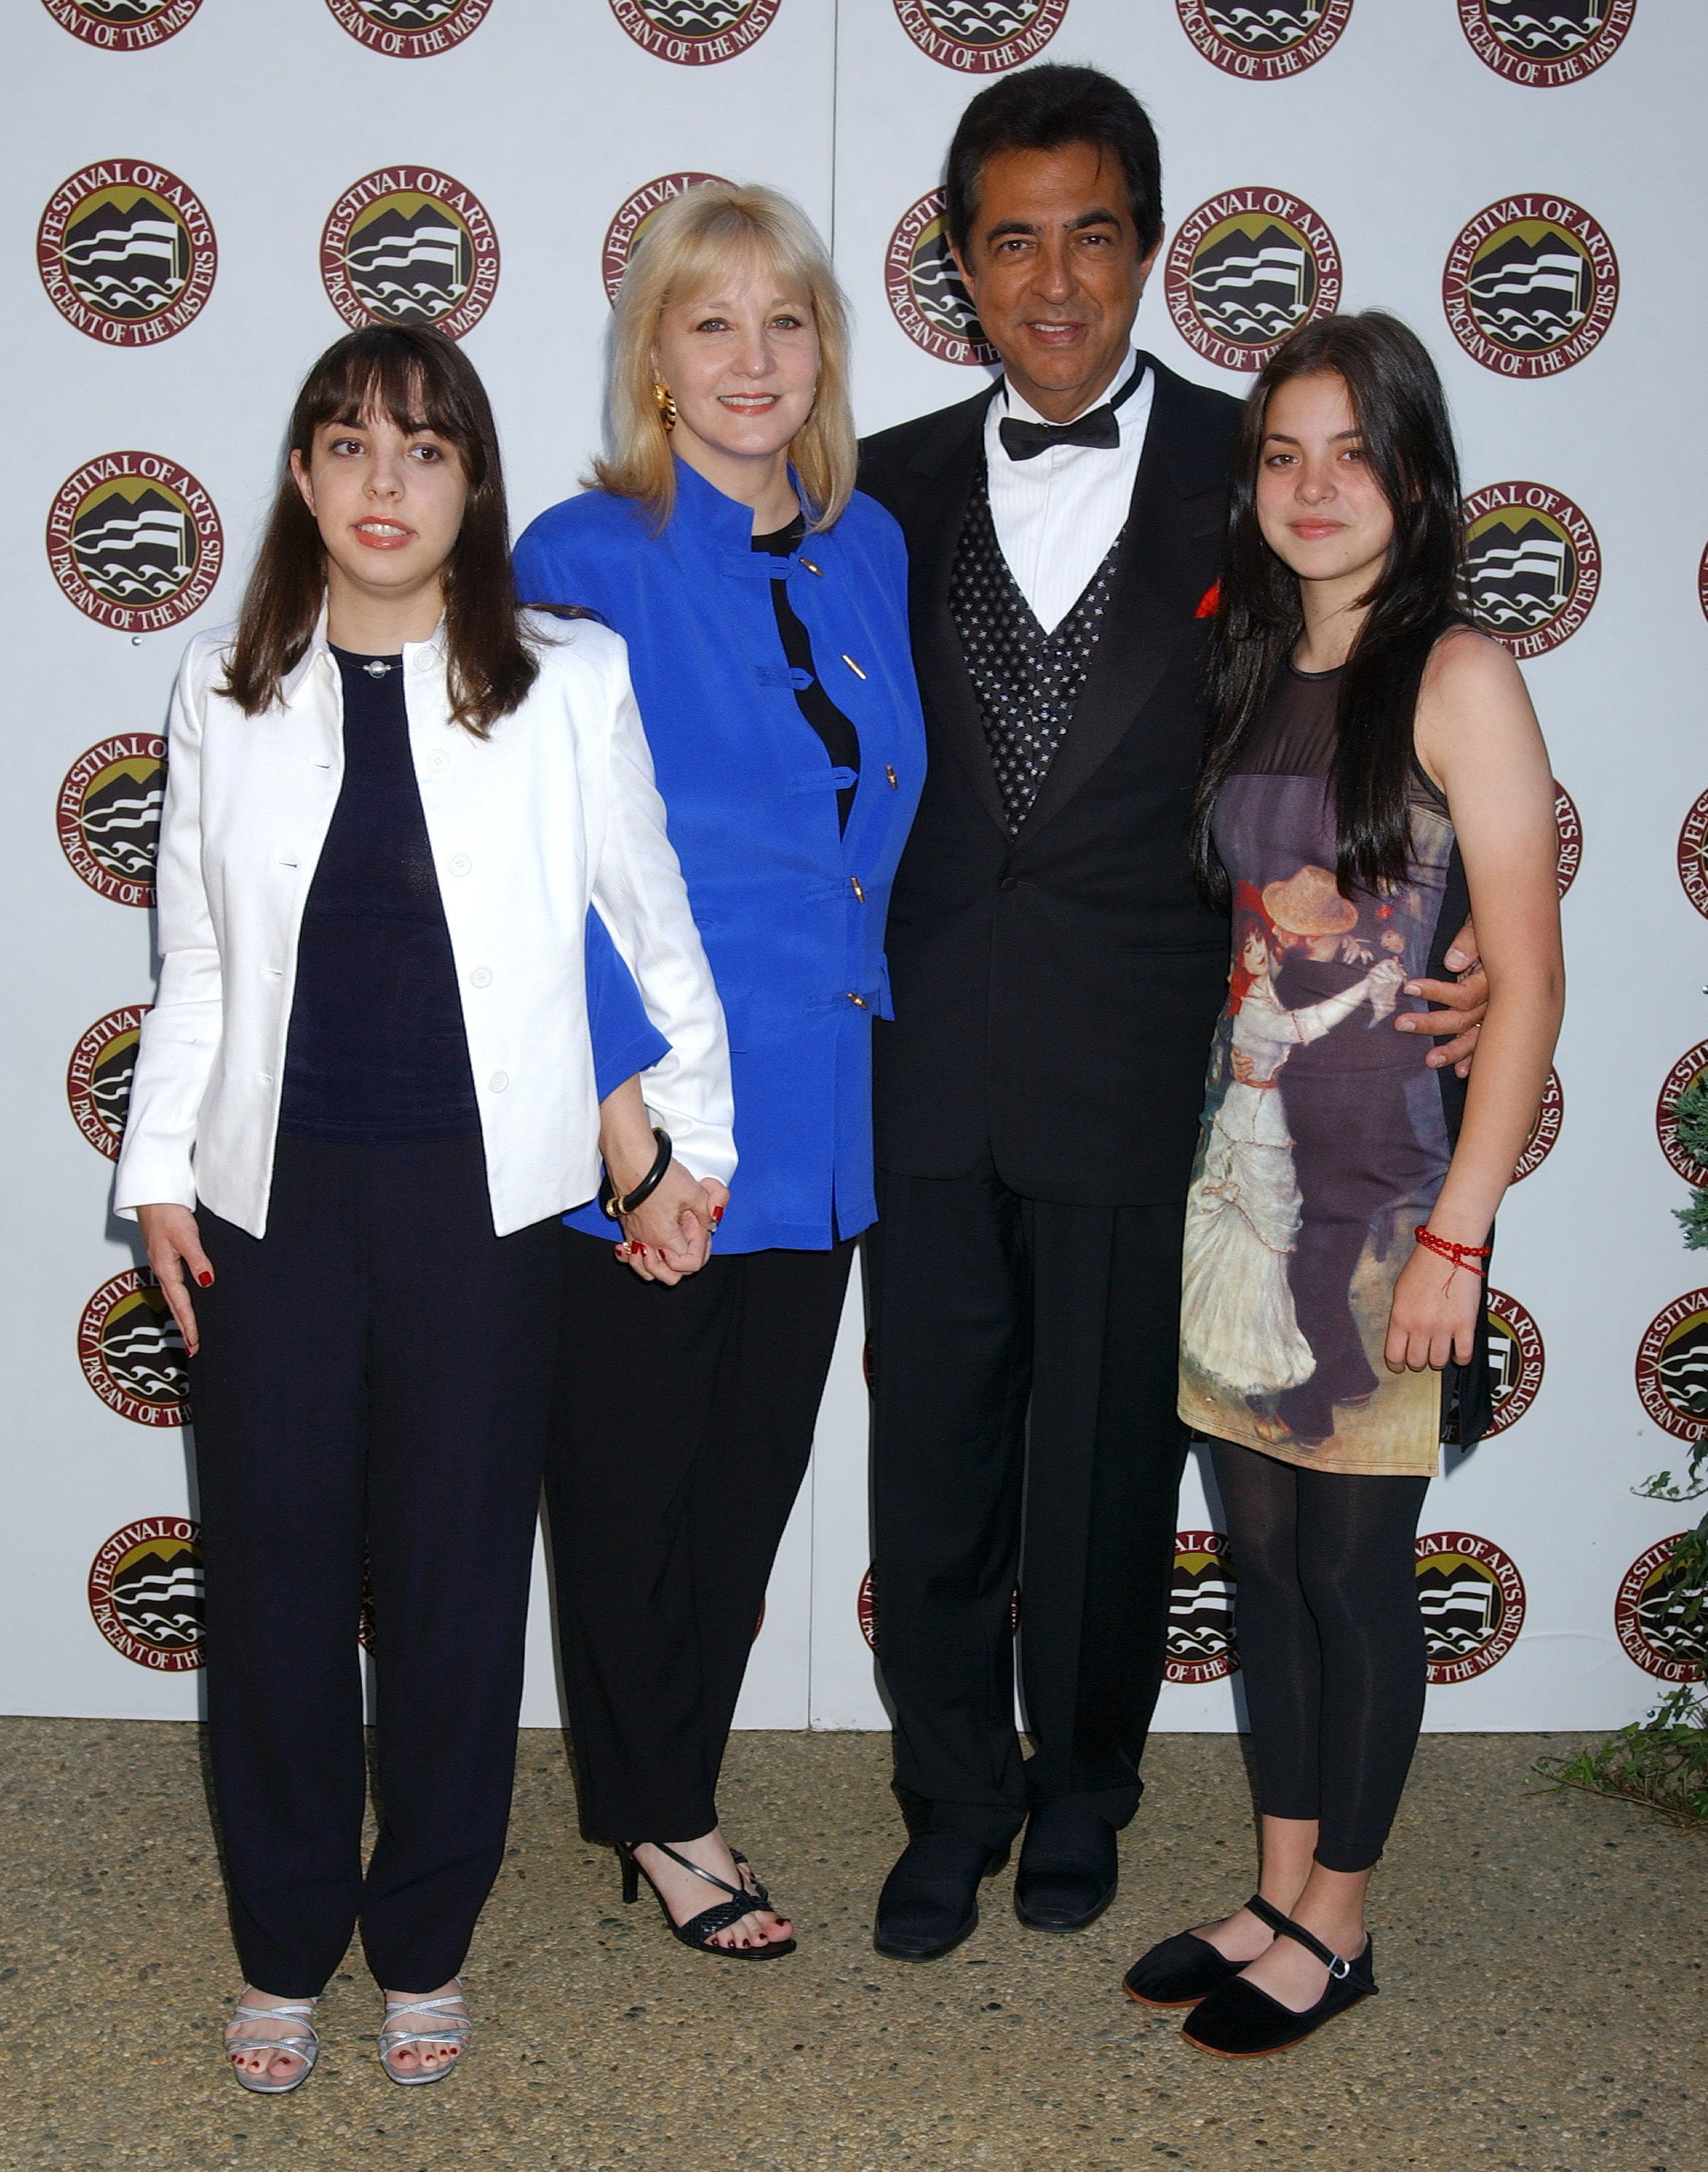 Joe Mantegna, wife Arlene, and daughters Mia and Gina. | Source: Getty Images